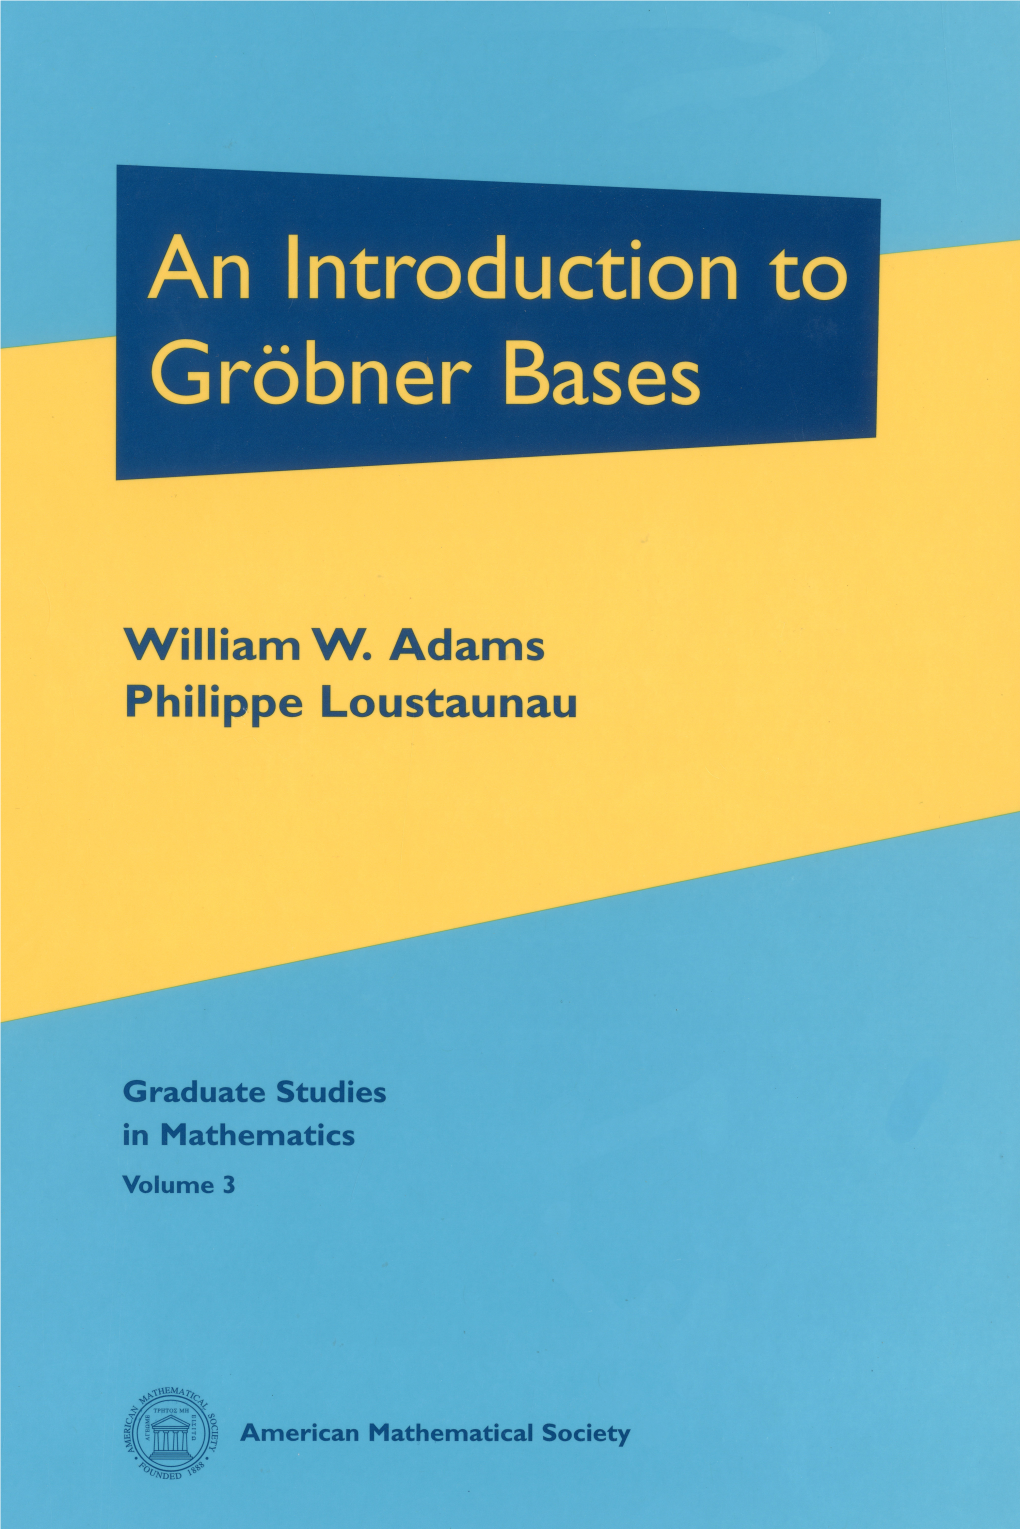 An Introduction to Gröbner Bases